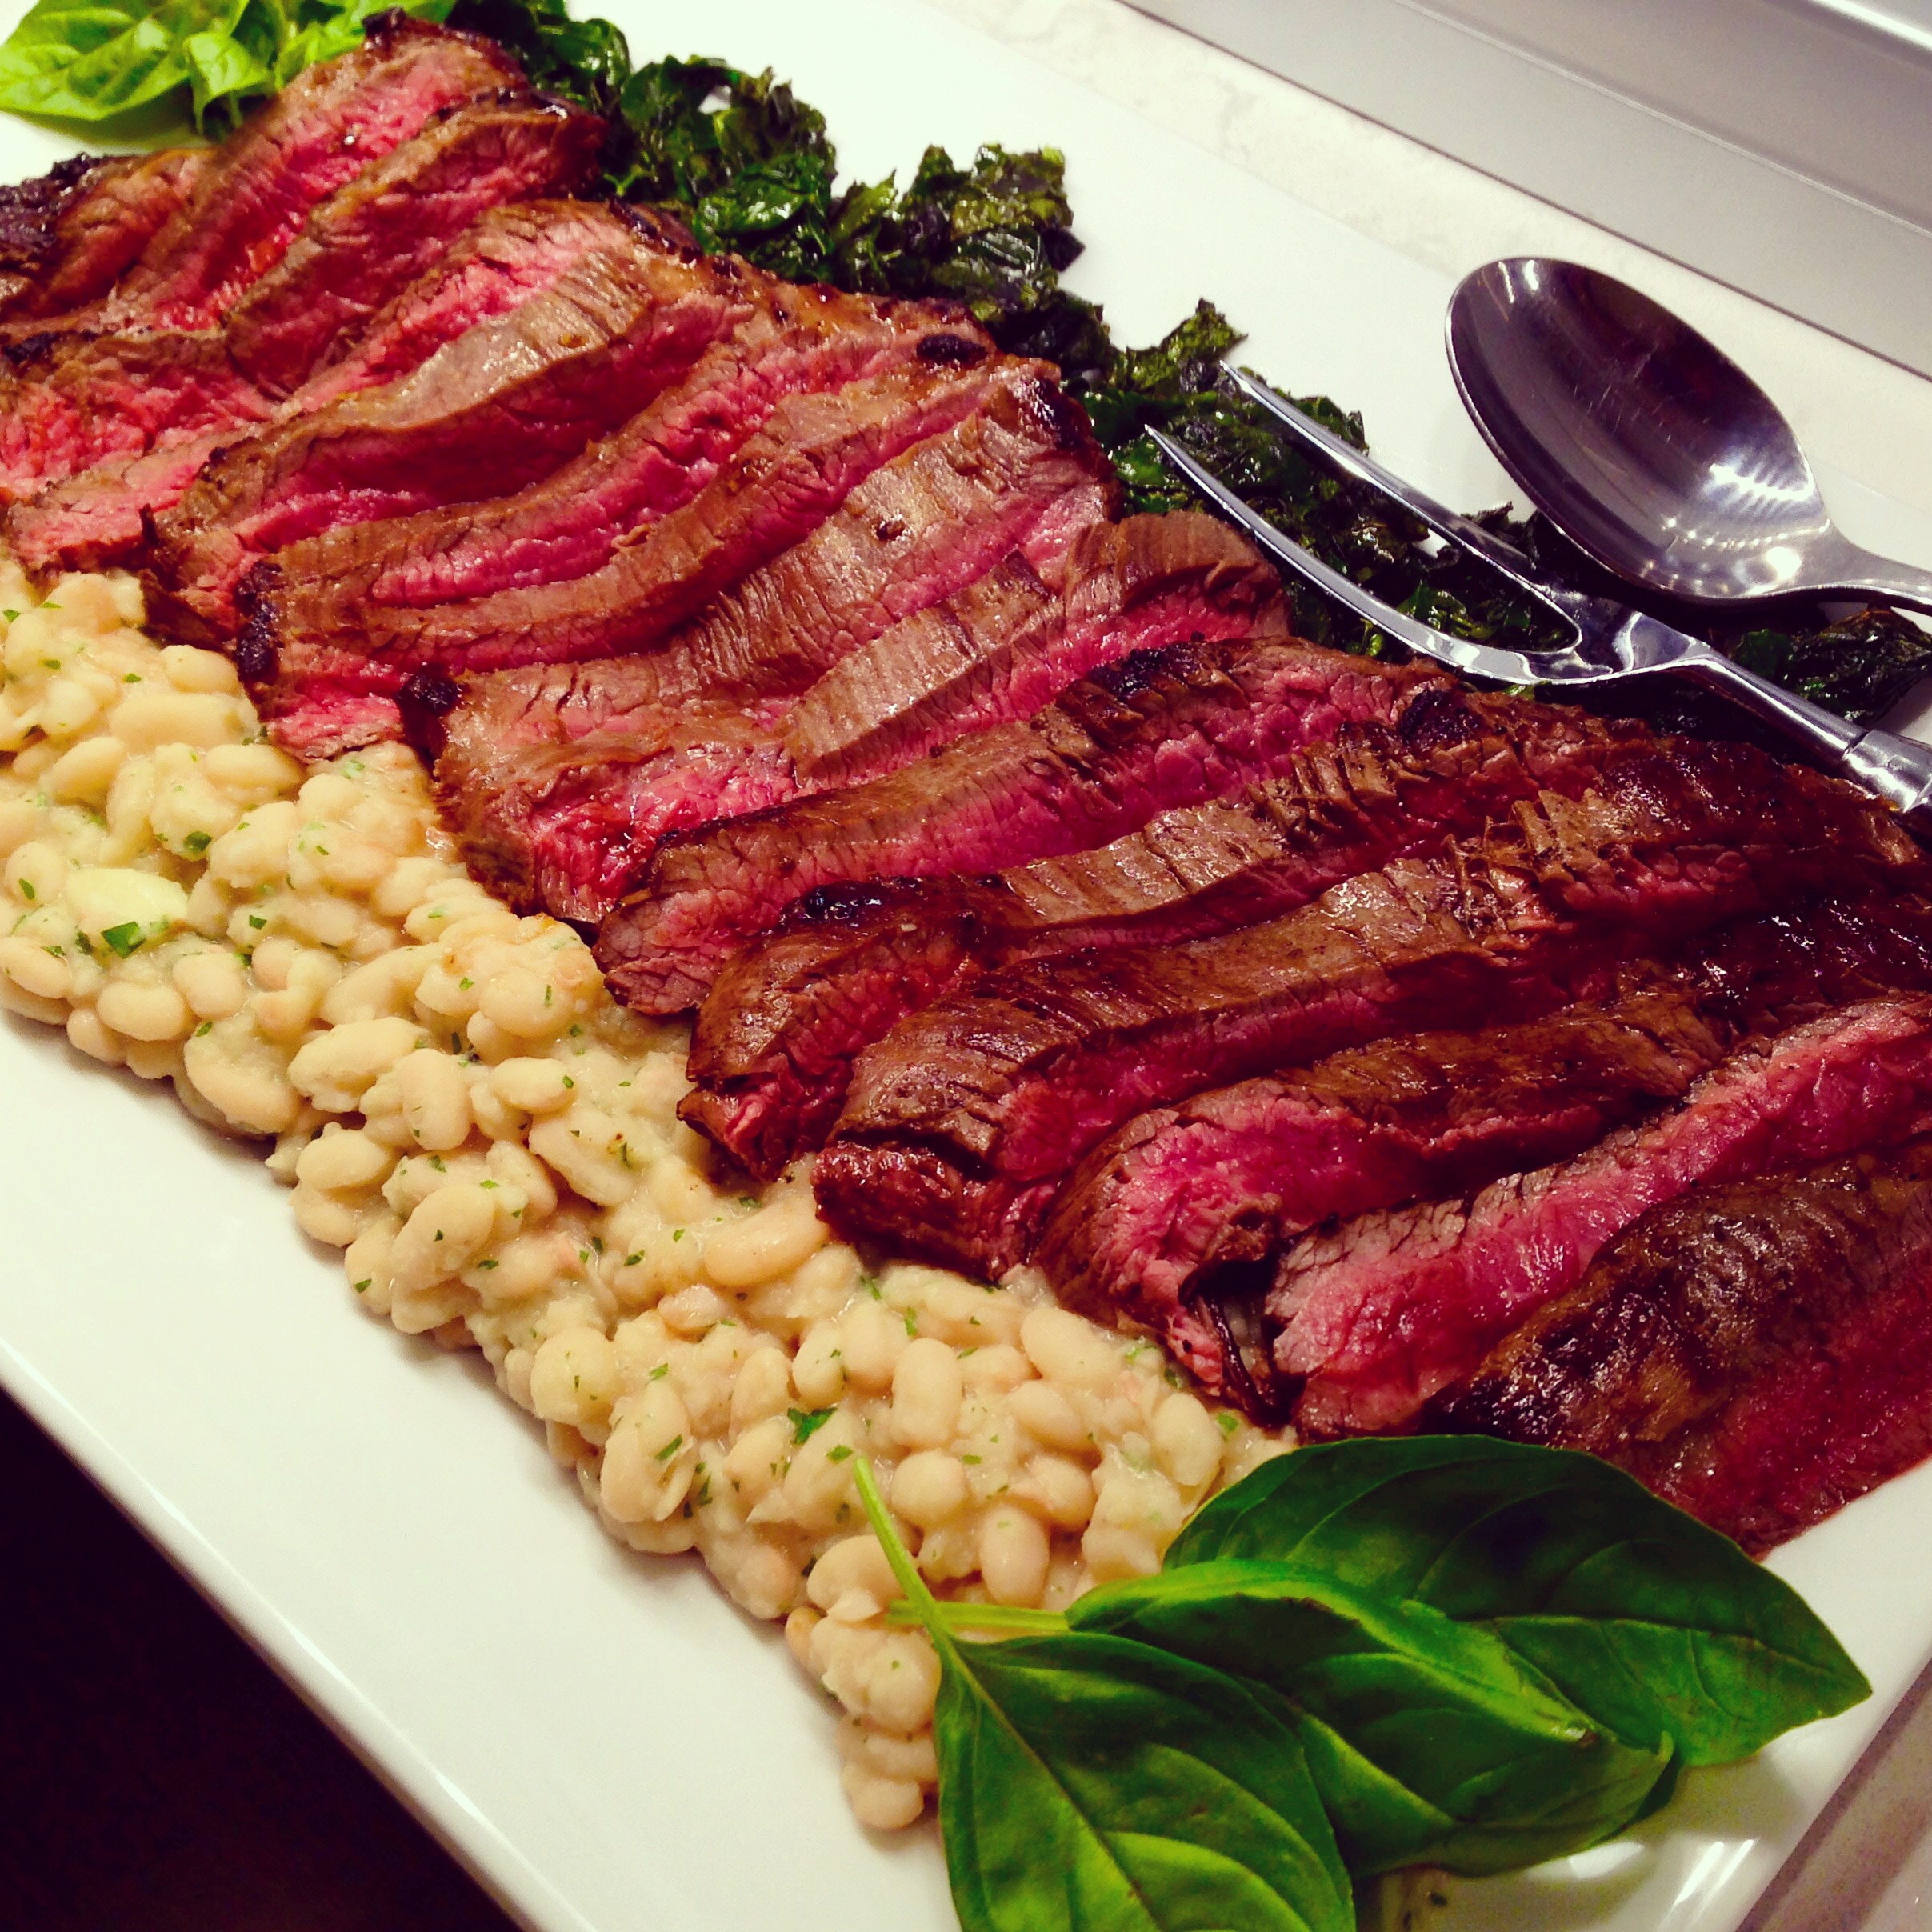 Sliced beef tagliata, Tuscan kale, and roasted garlic-rosemary cannellini beans